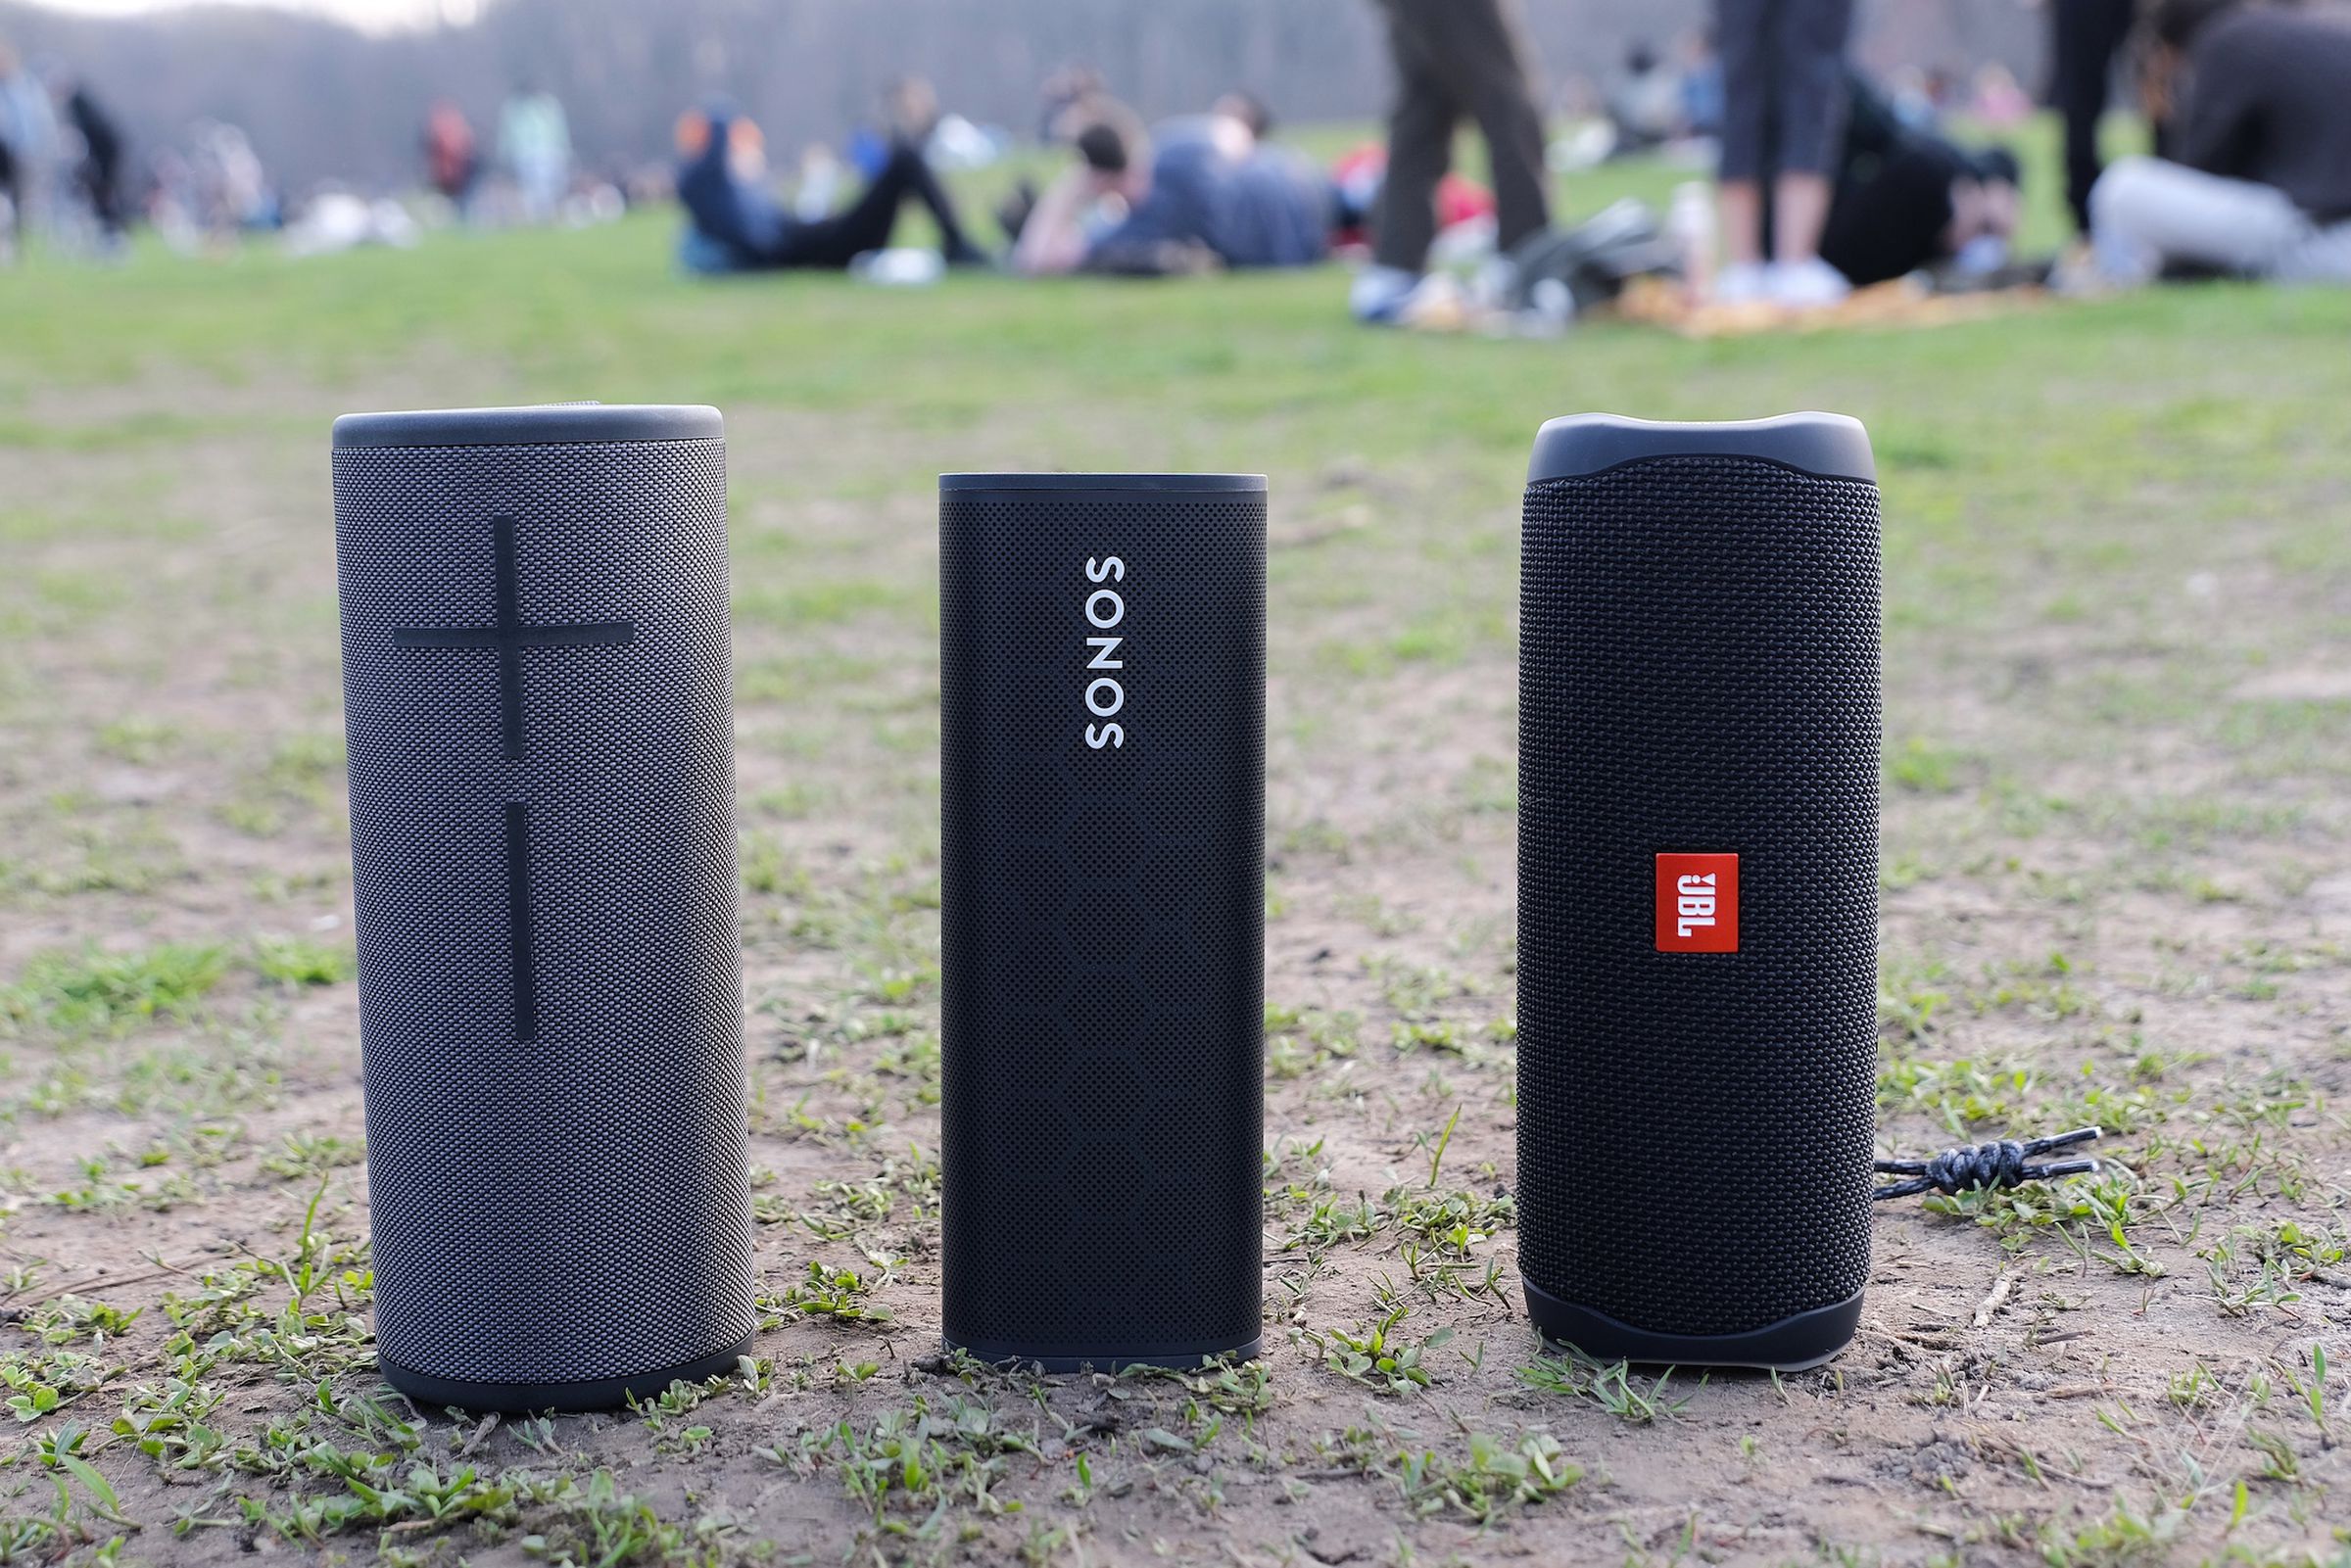 Pictured from left: the UE Boom 3, Sonos Roam, and JBL Flip 5.